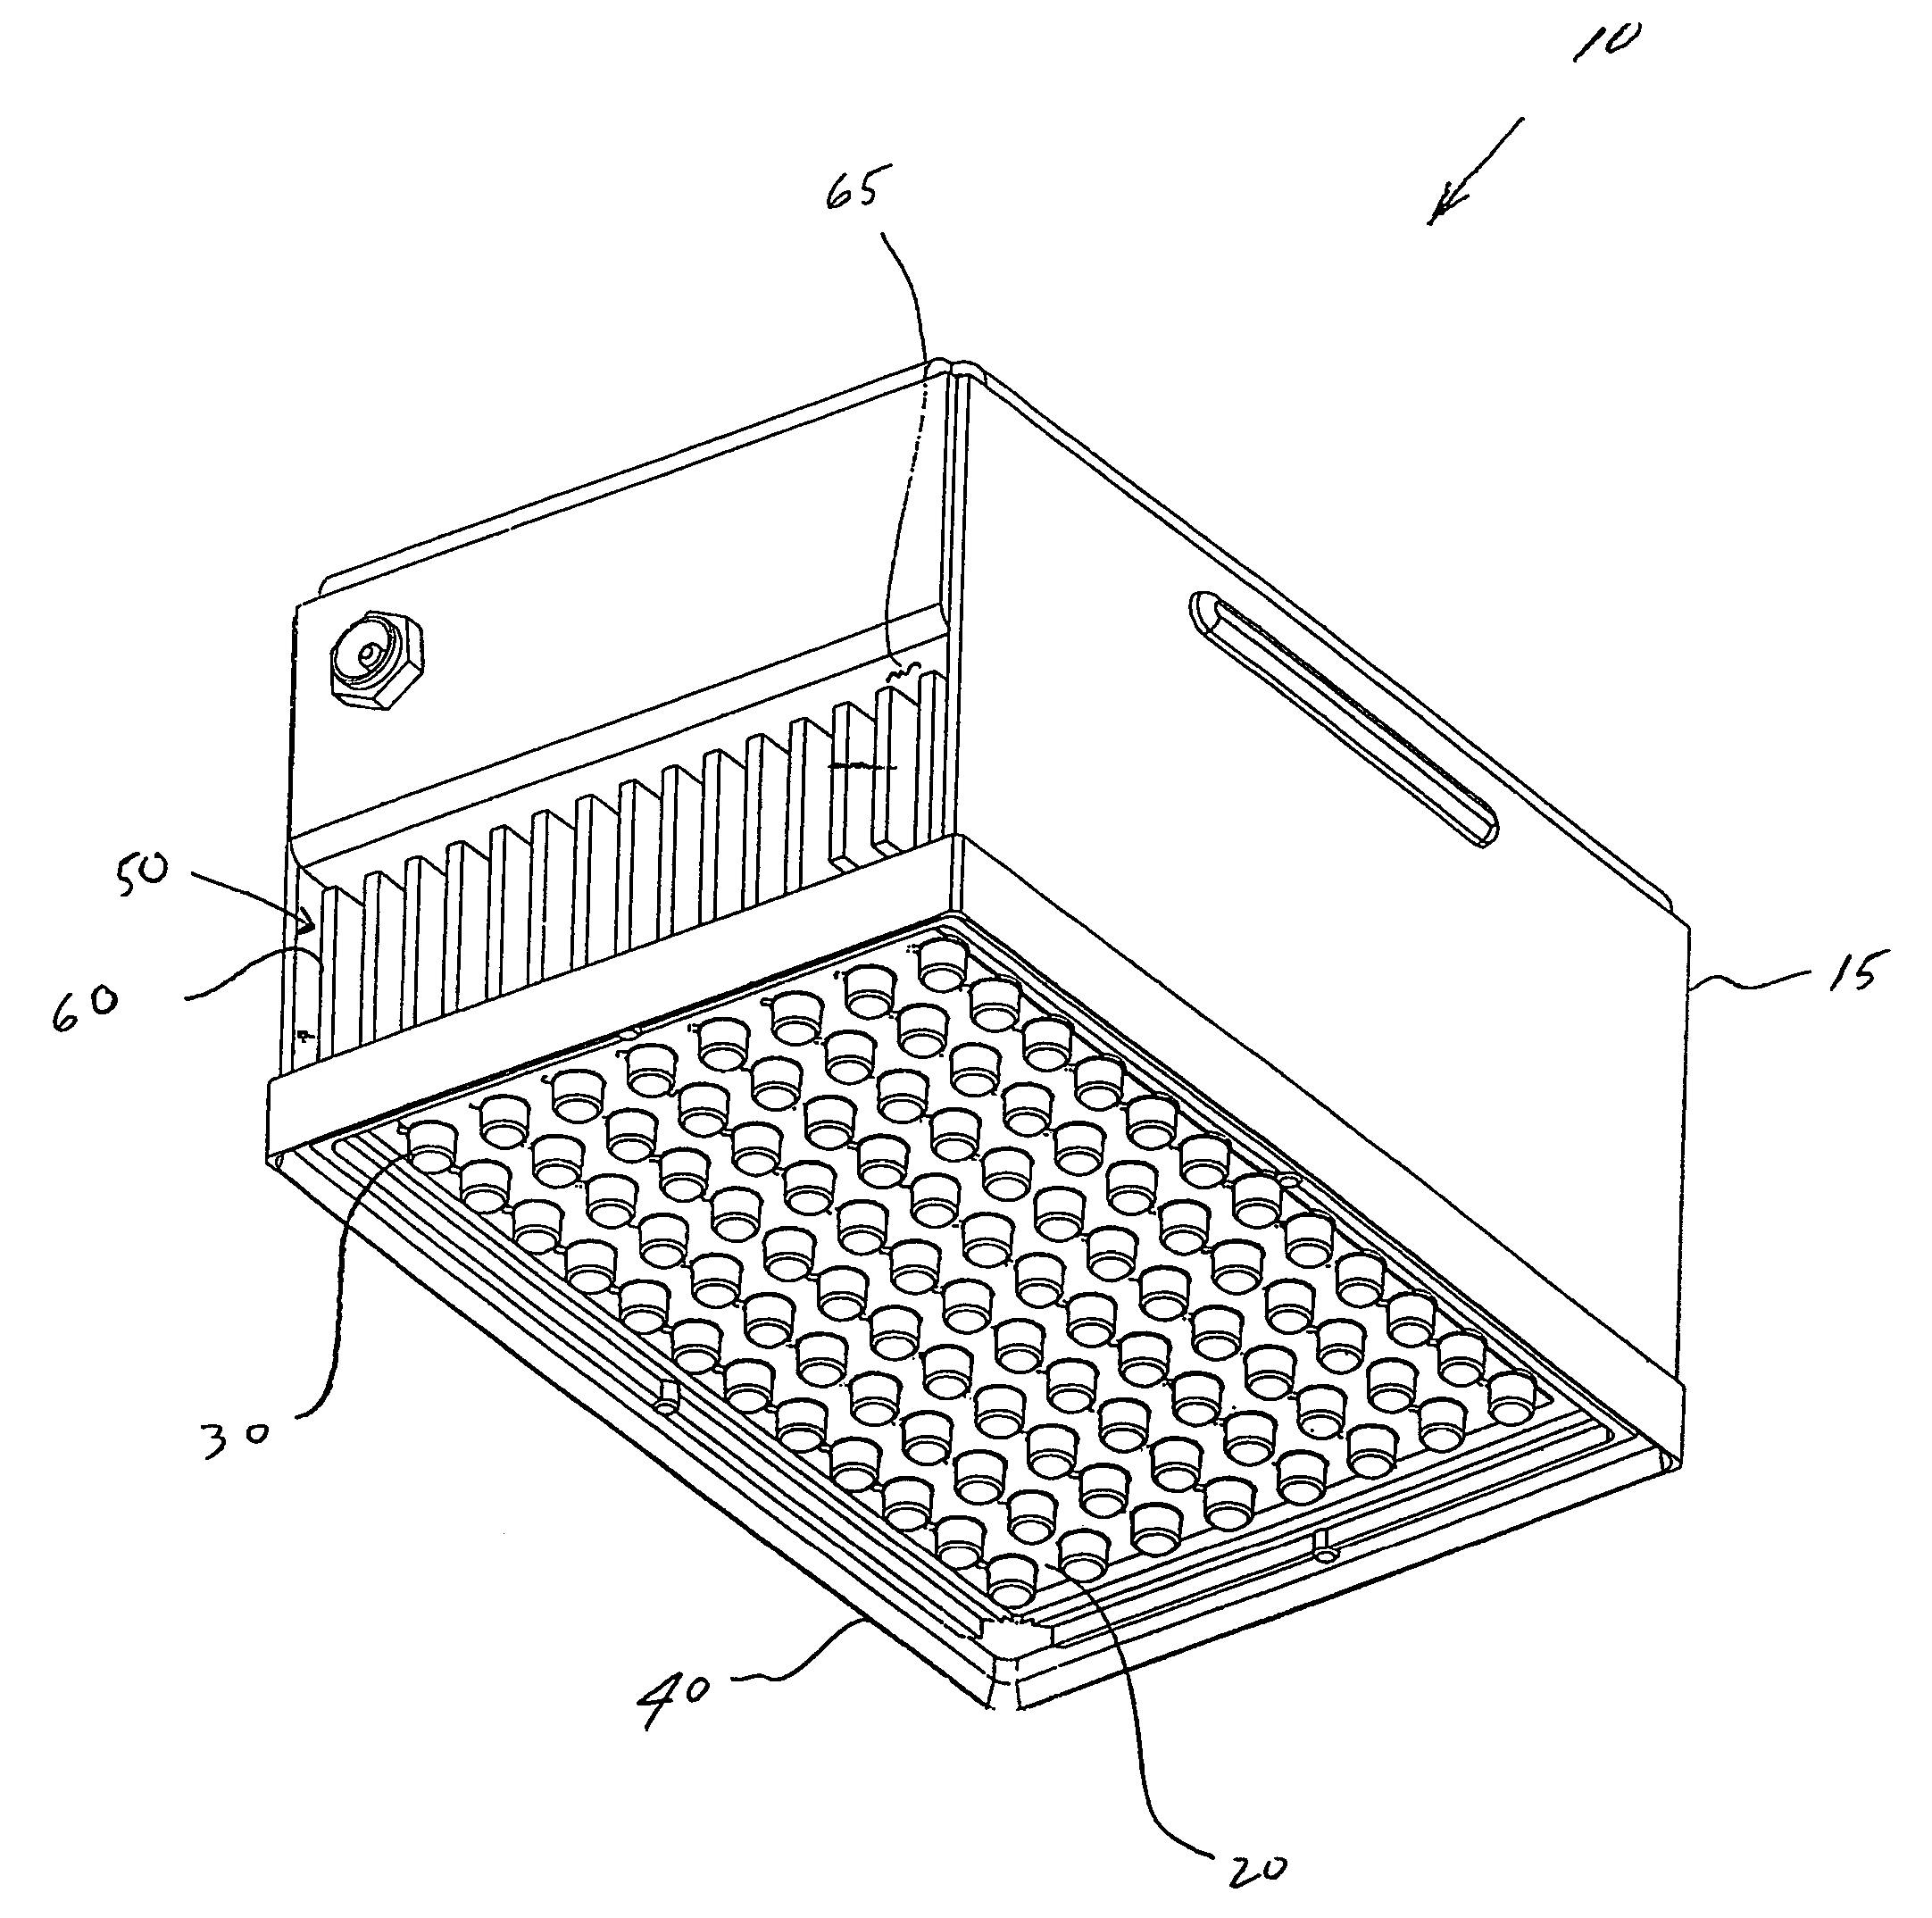 Photoactivation device and method